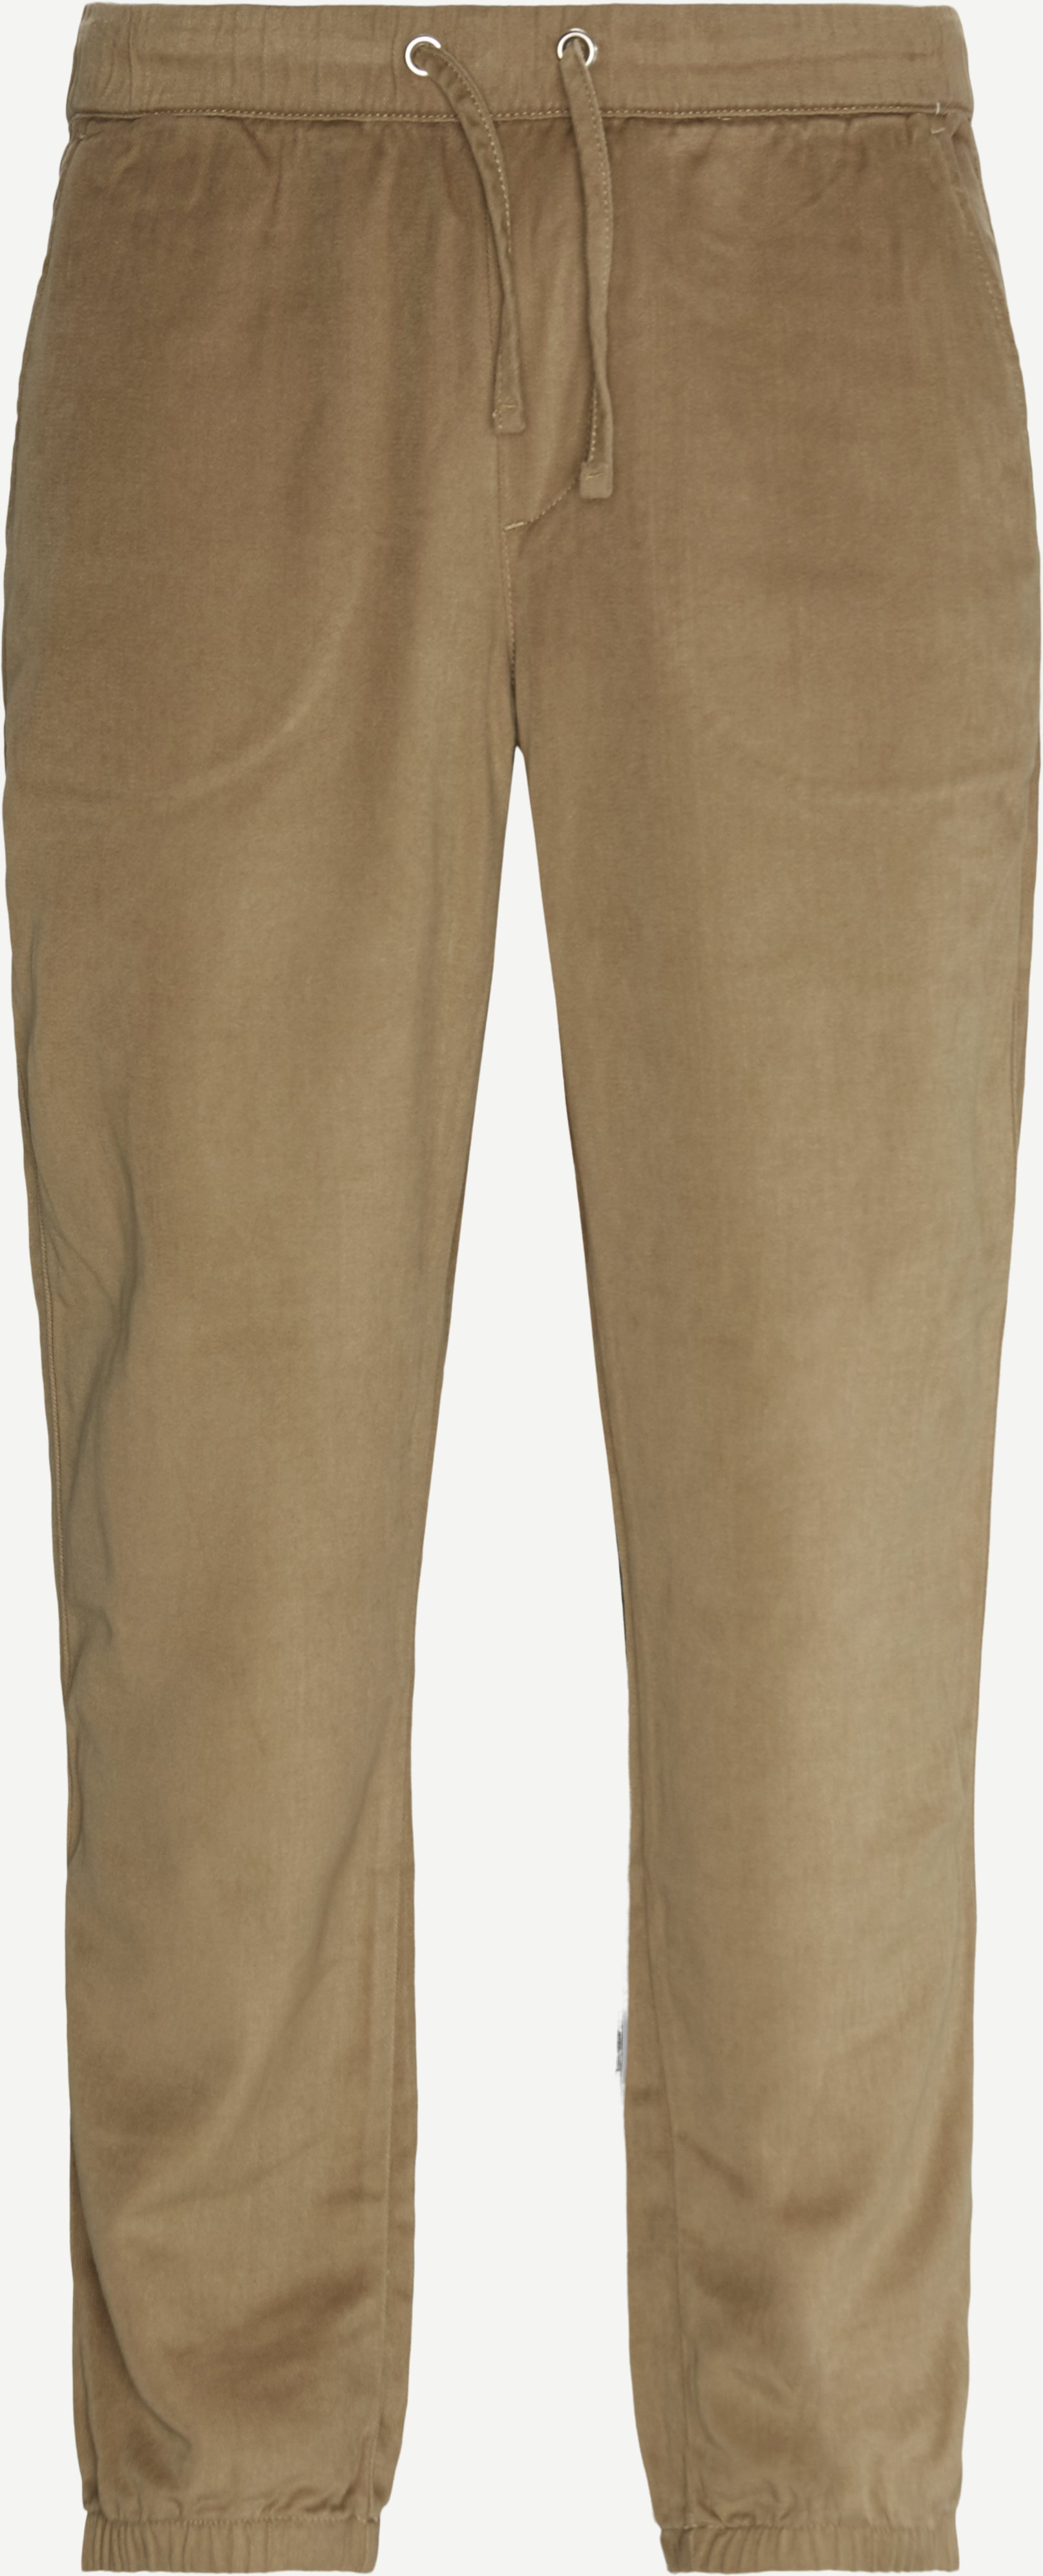 Pelle Trousers - Trousers - Regular fit - Sand